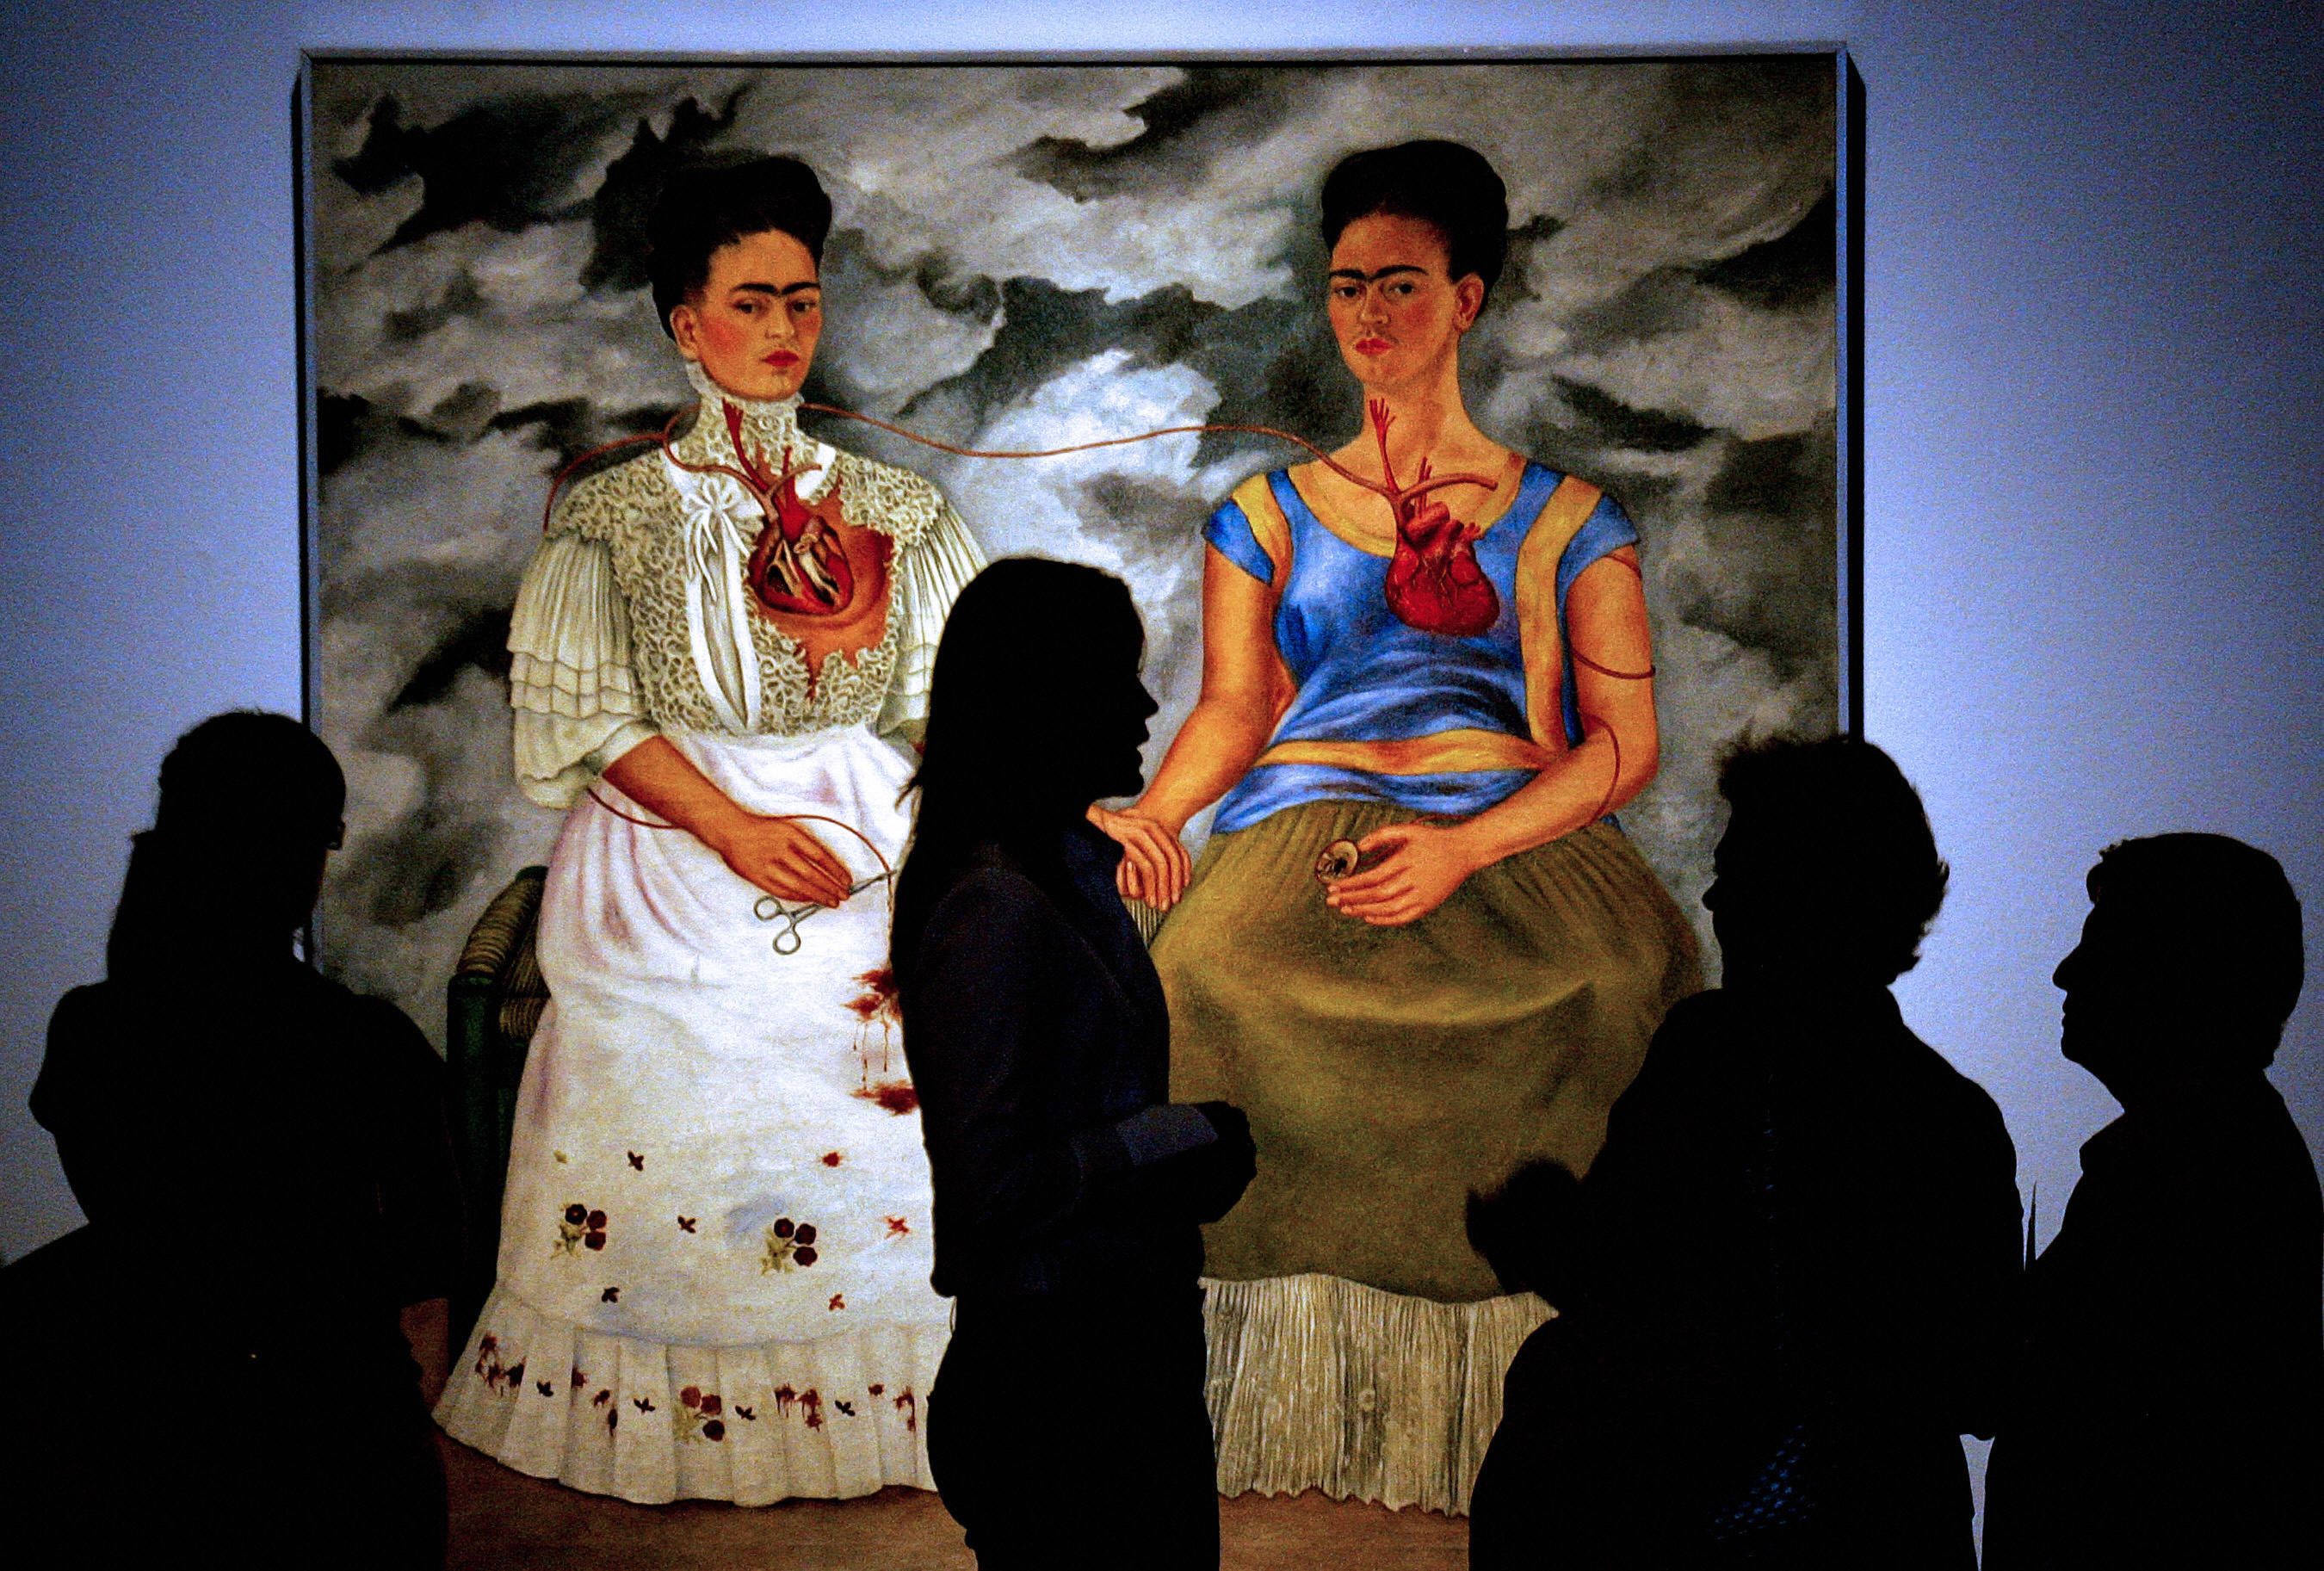 20 Best Female Artists of All time - Most Influential Female Artists  Through History